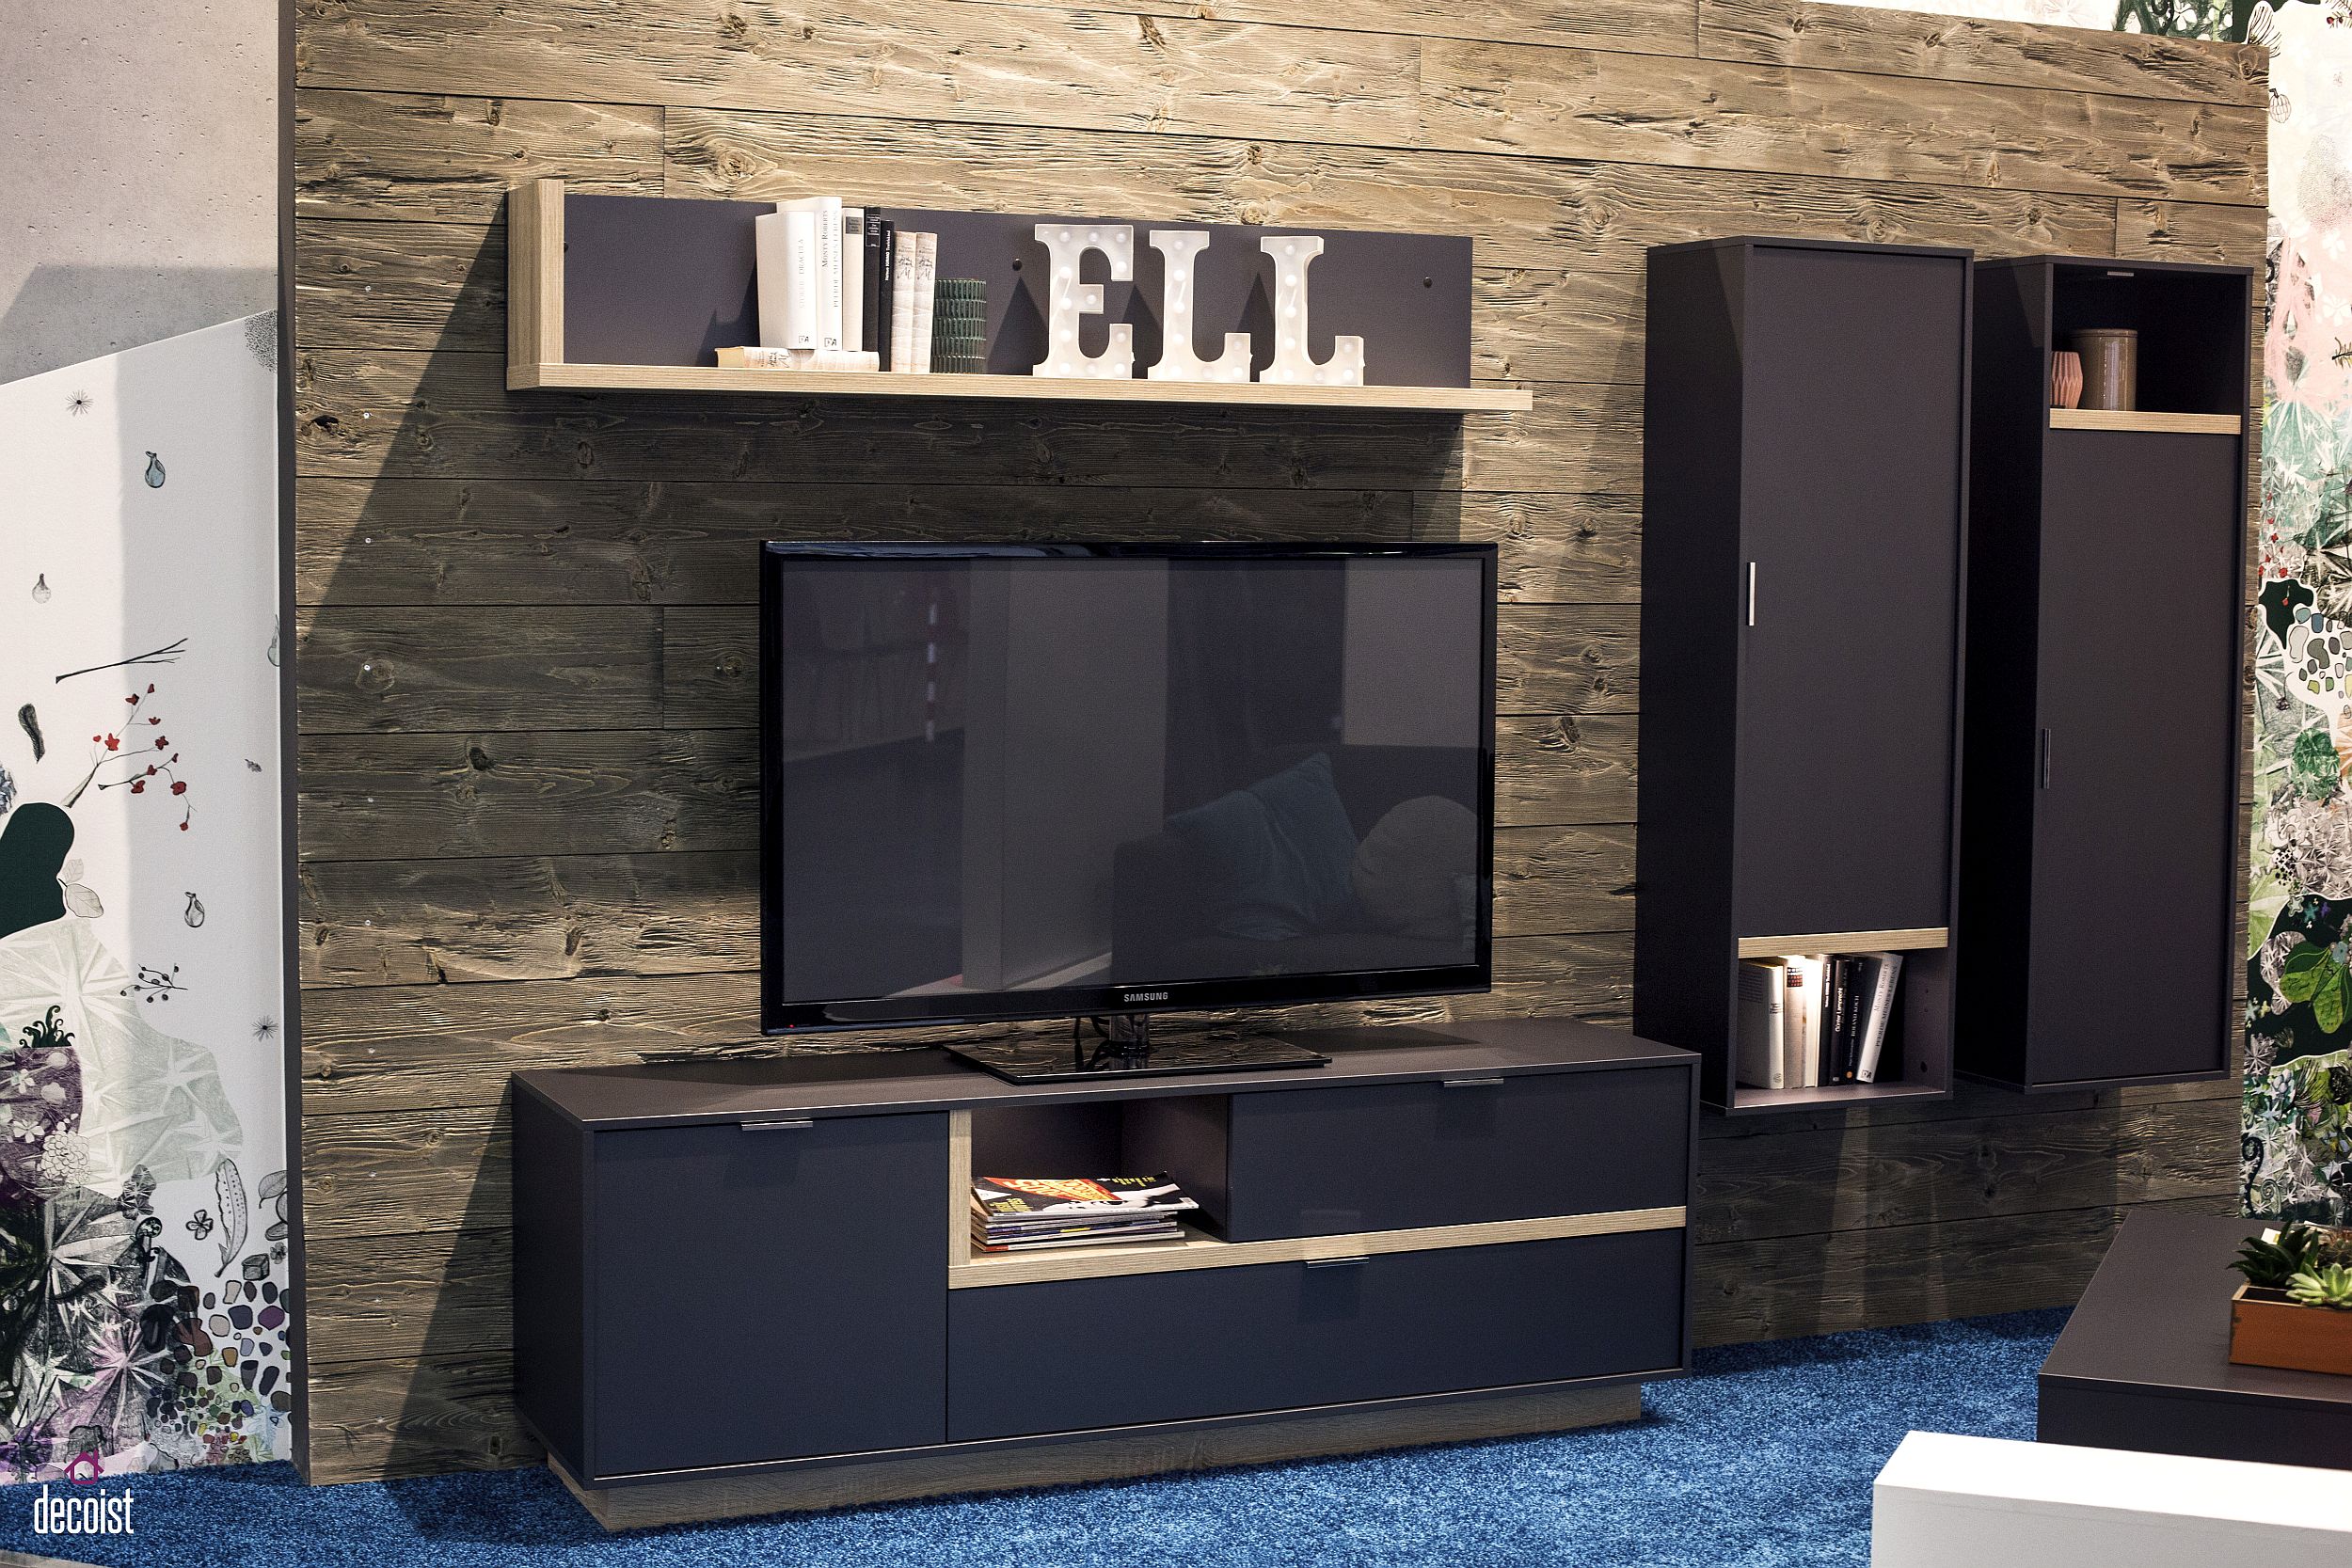 Modern coffee table TV cabinet living room TV cabinet three cabinets TV Stand 